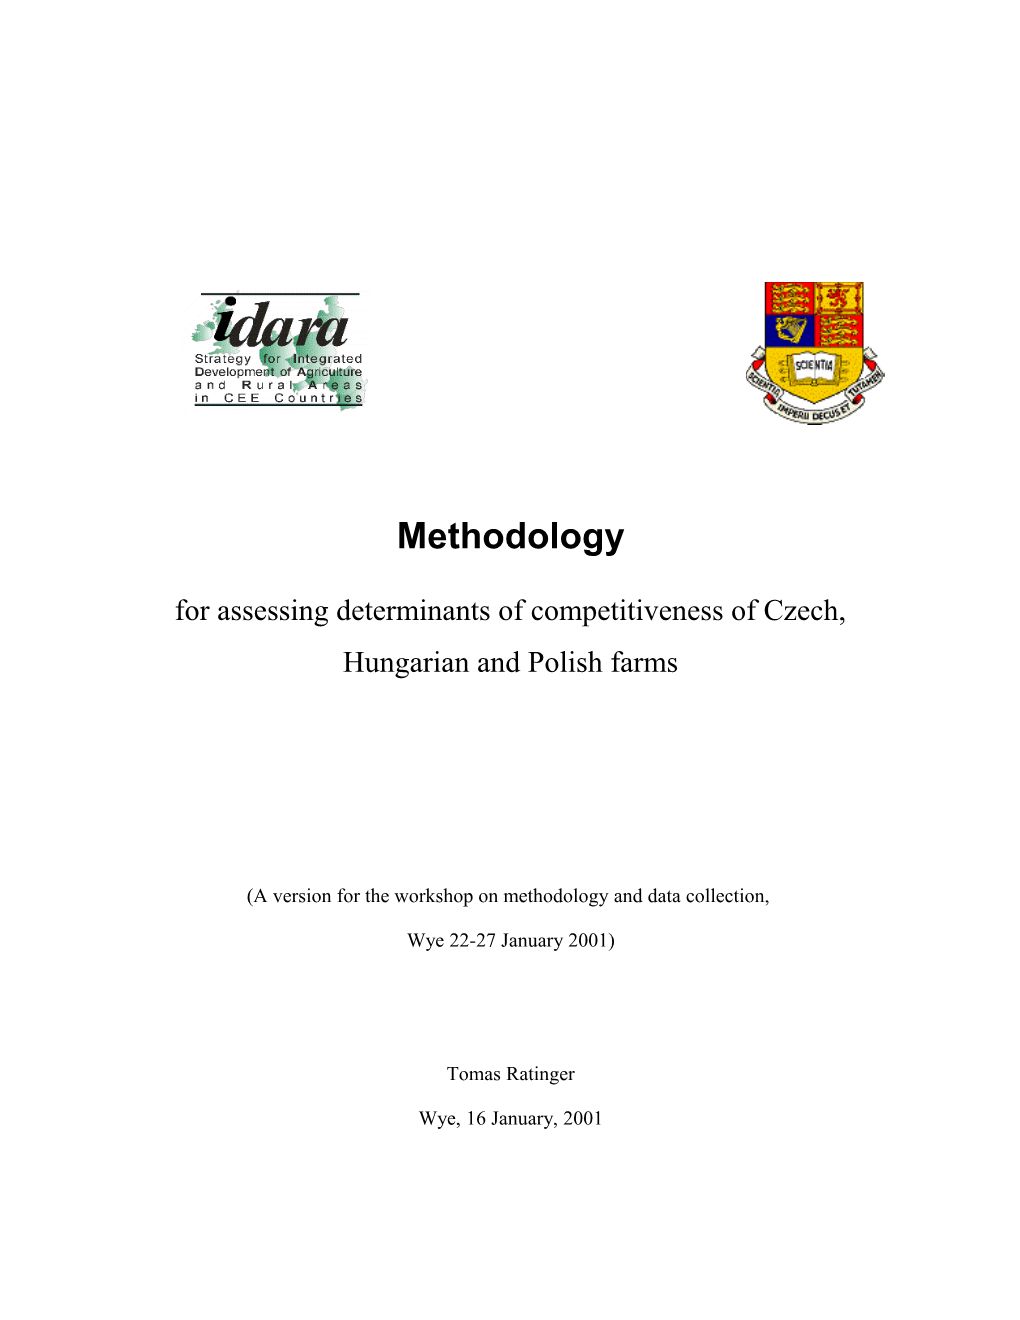 For Assessing Determinants of Competitiveness of Czech, Hungarian and Polish Farms